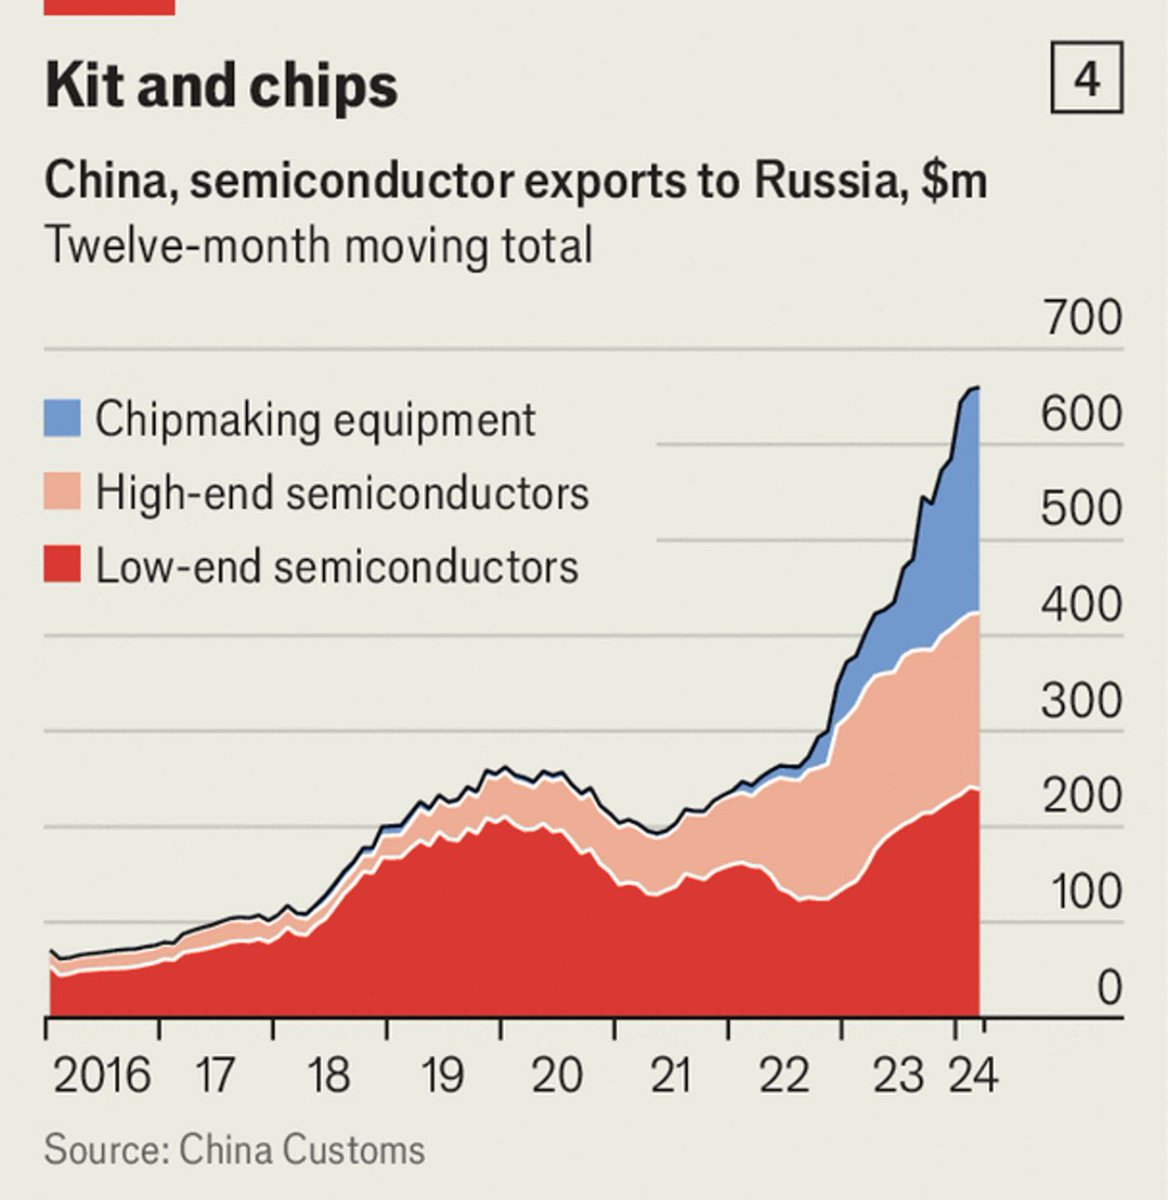 Two charts from this week’s Economist - no. of mtgs btwn Xi and foreign leaders (spoiler alert: Putin has had the most) and China’s exports of semiconductors and chip mfg kit to Russia.